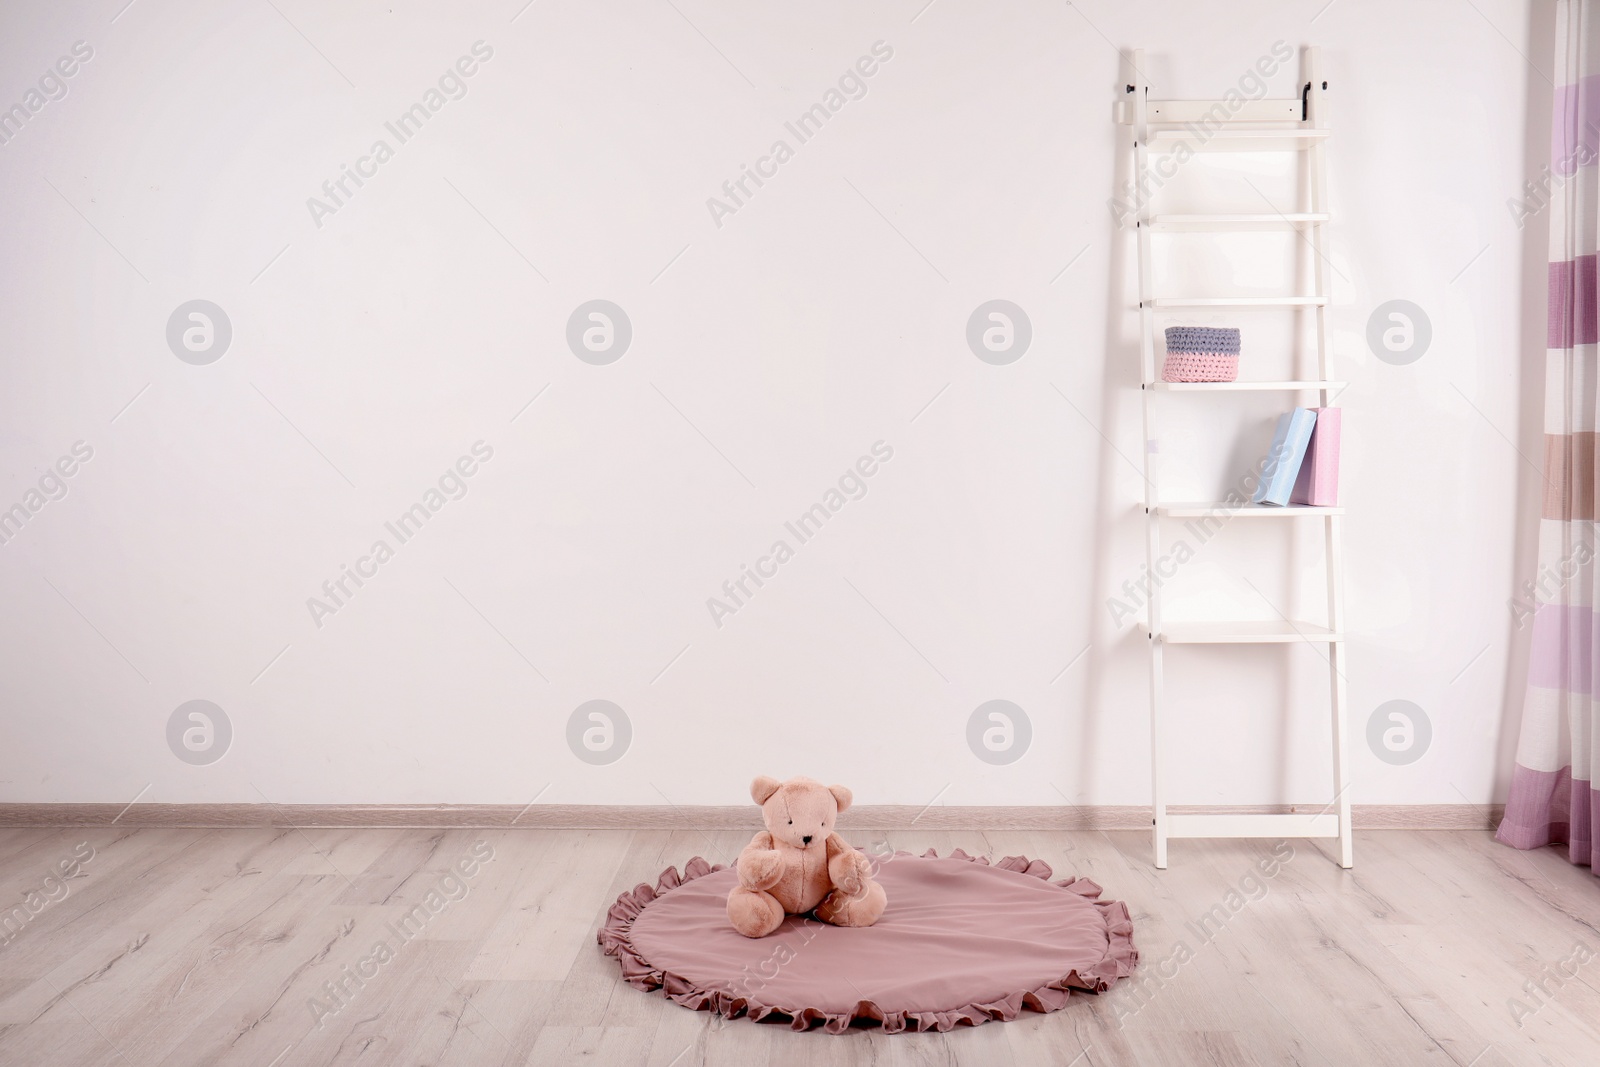 Photo of Teddy bear on floor and shelving unit near wall in child room. Space for text